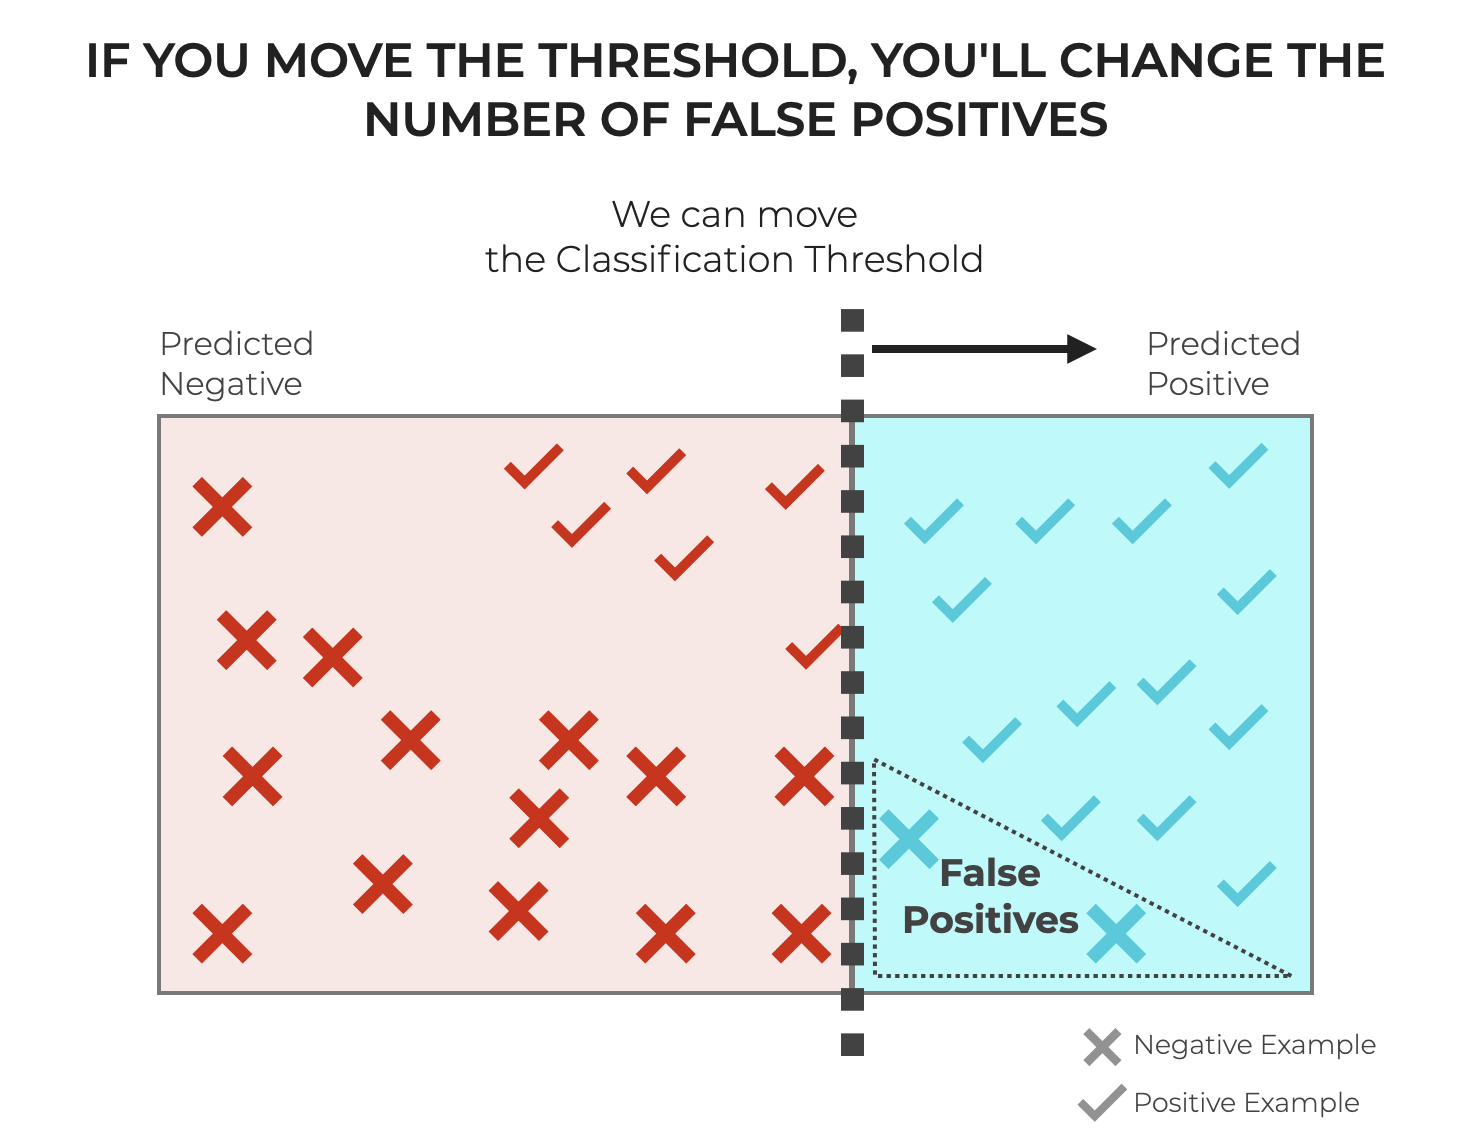 An image that shows how changing the classification threshold changes the number of False Positives.